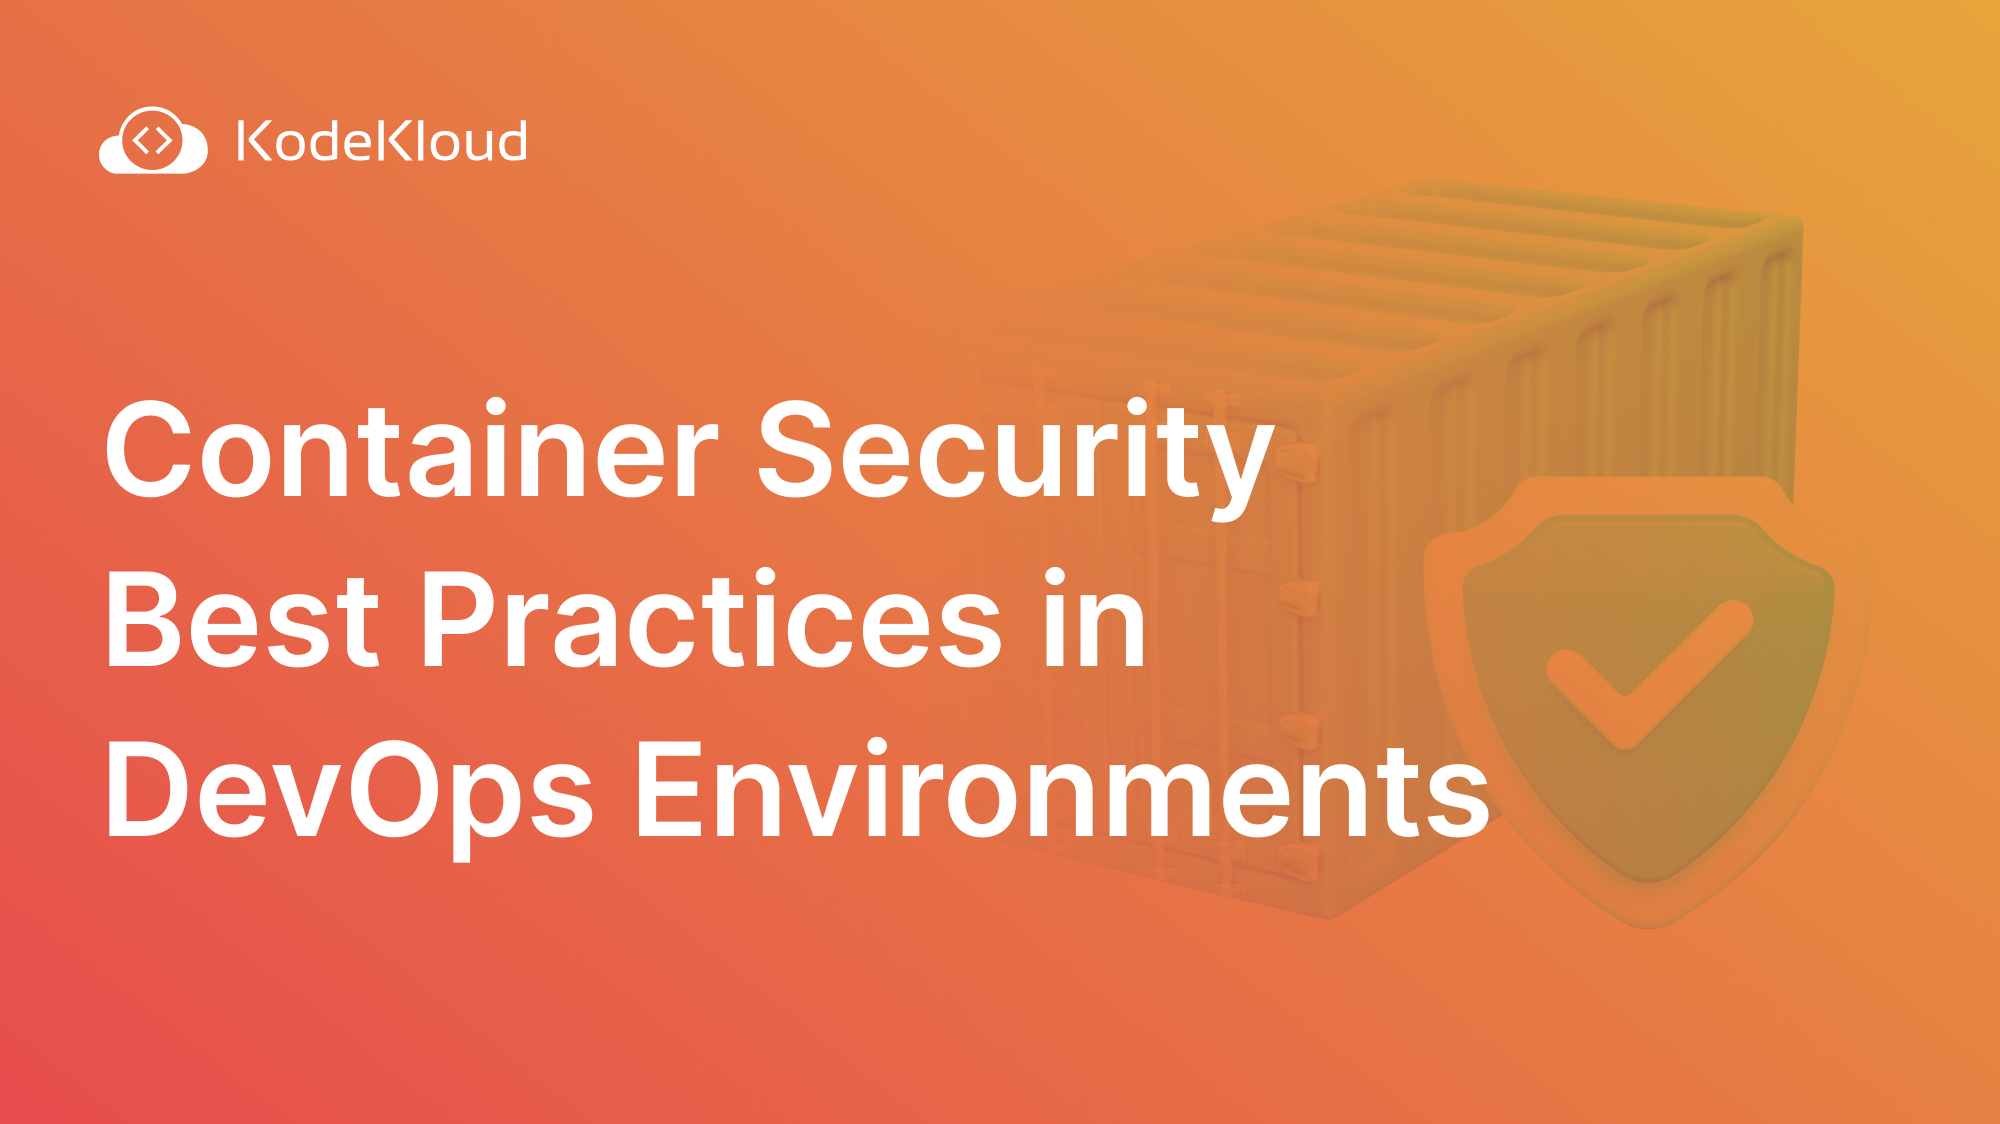 Container Security Best Practices in Container Security Best Practices in DevOps Environments